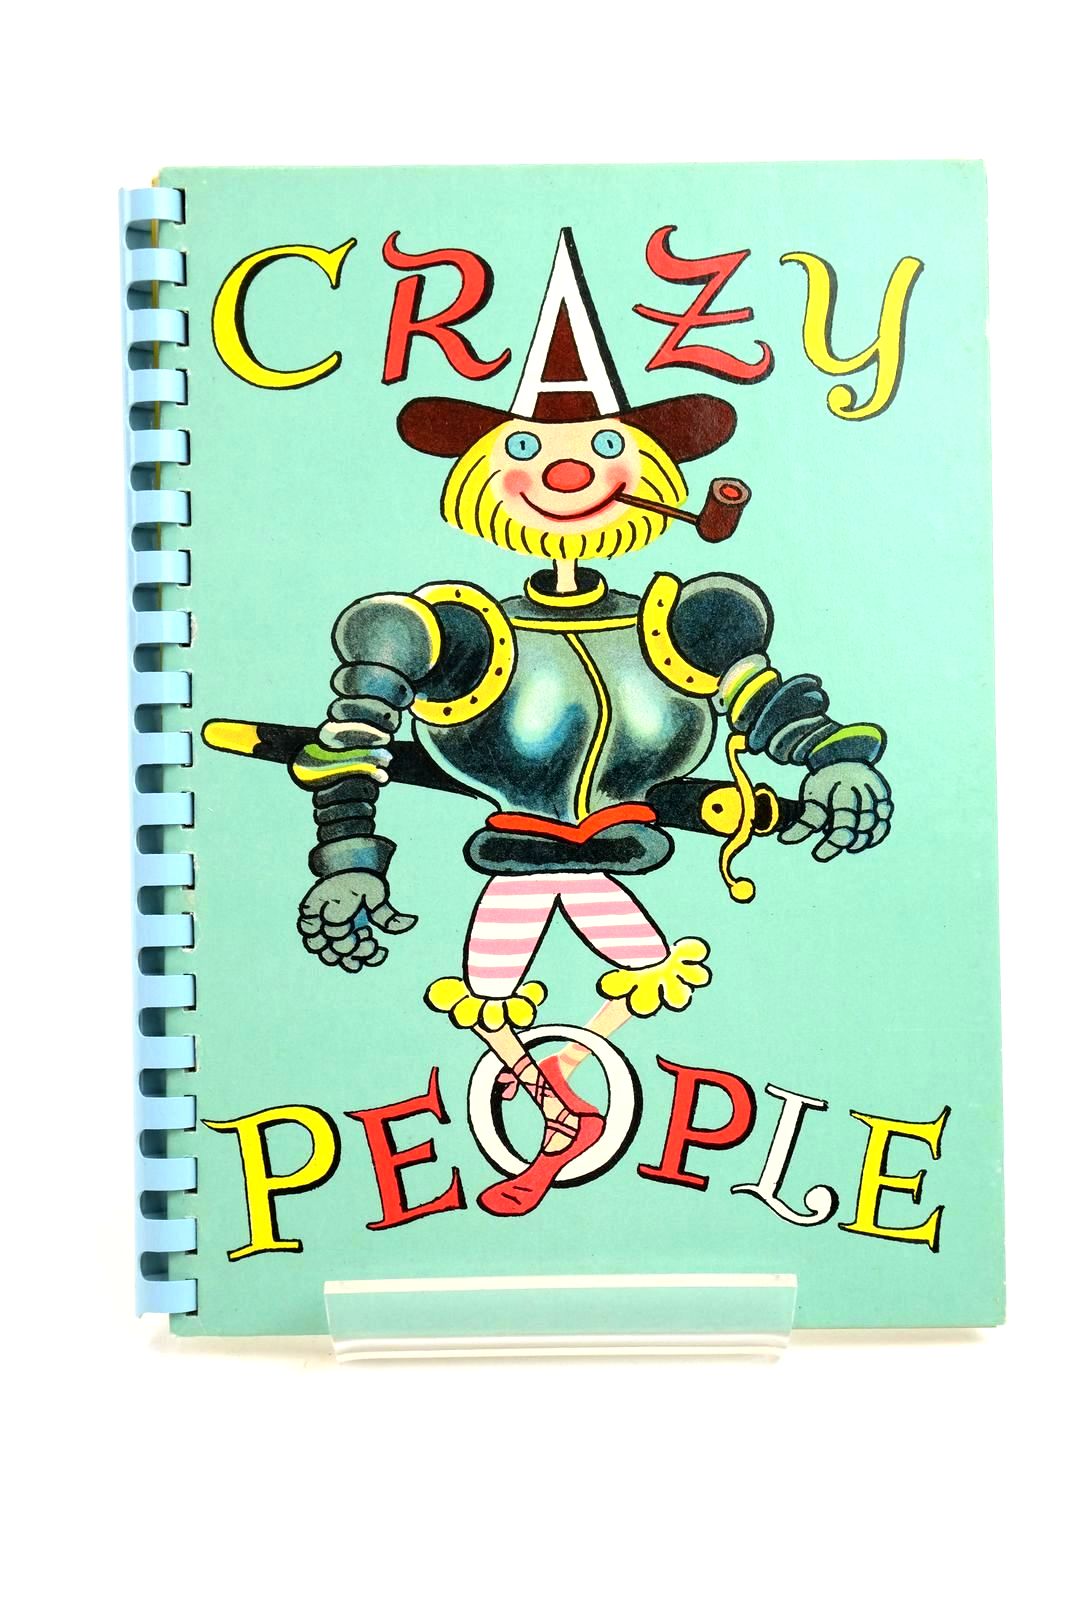 Photo of 8192 CRAZY PEOPLE illustrated by Trier, Walter published by Atrium Press Ltd. (STOCK CODE: 1321872)  for sale by Stella & Rose's Books